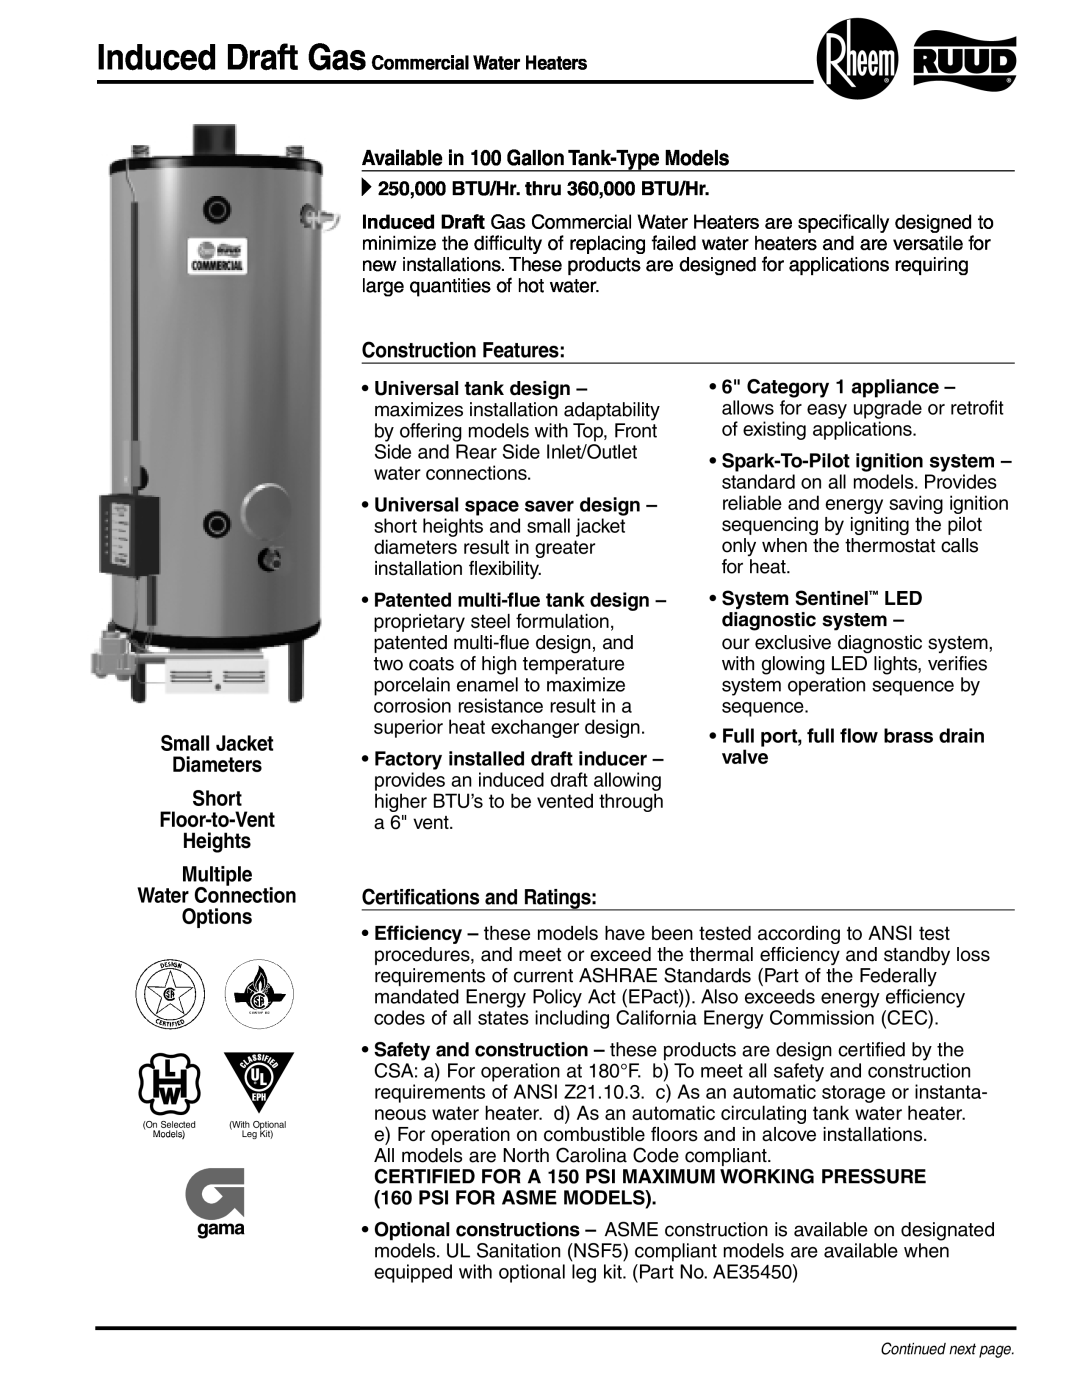 Rheem Induced Draft manual Available in 100 Gallon Tank-Type Models, Construction Features, Water Connection Options 